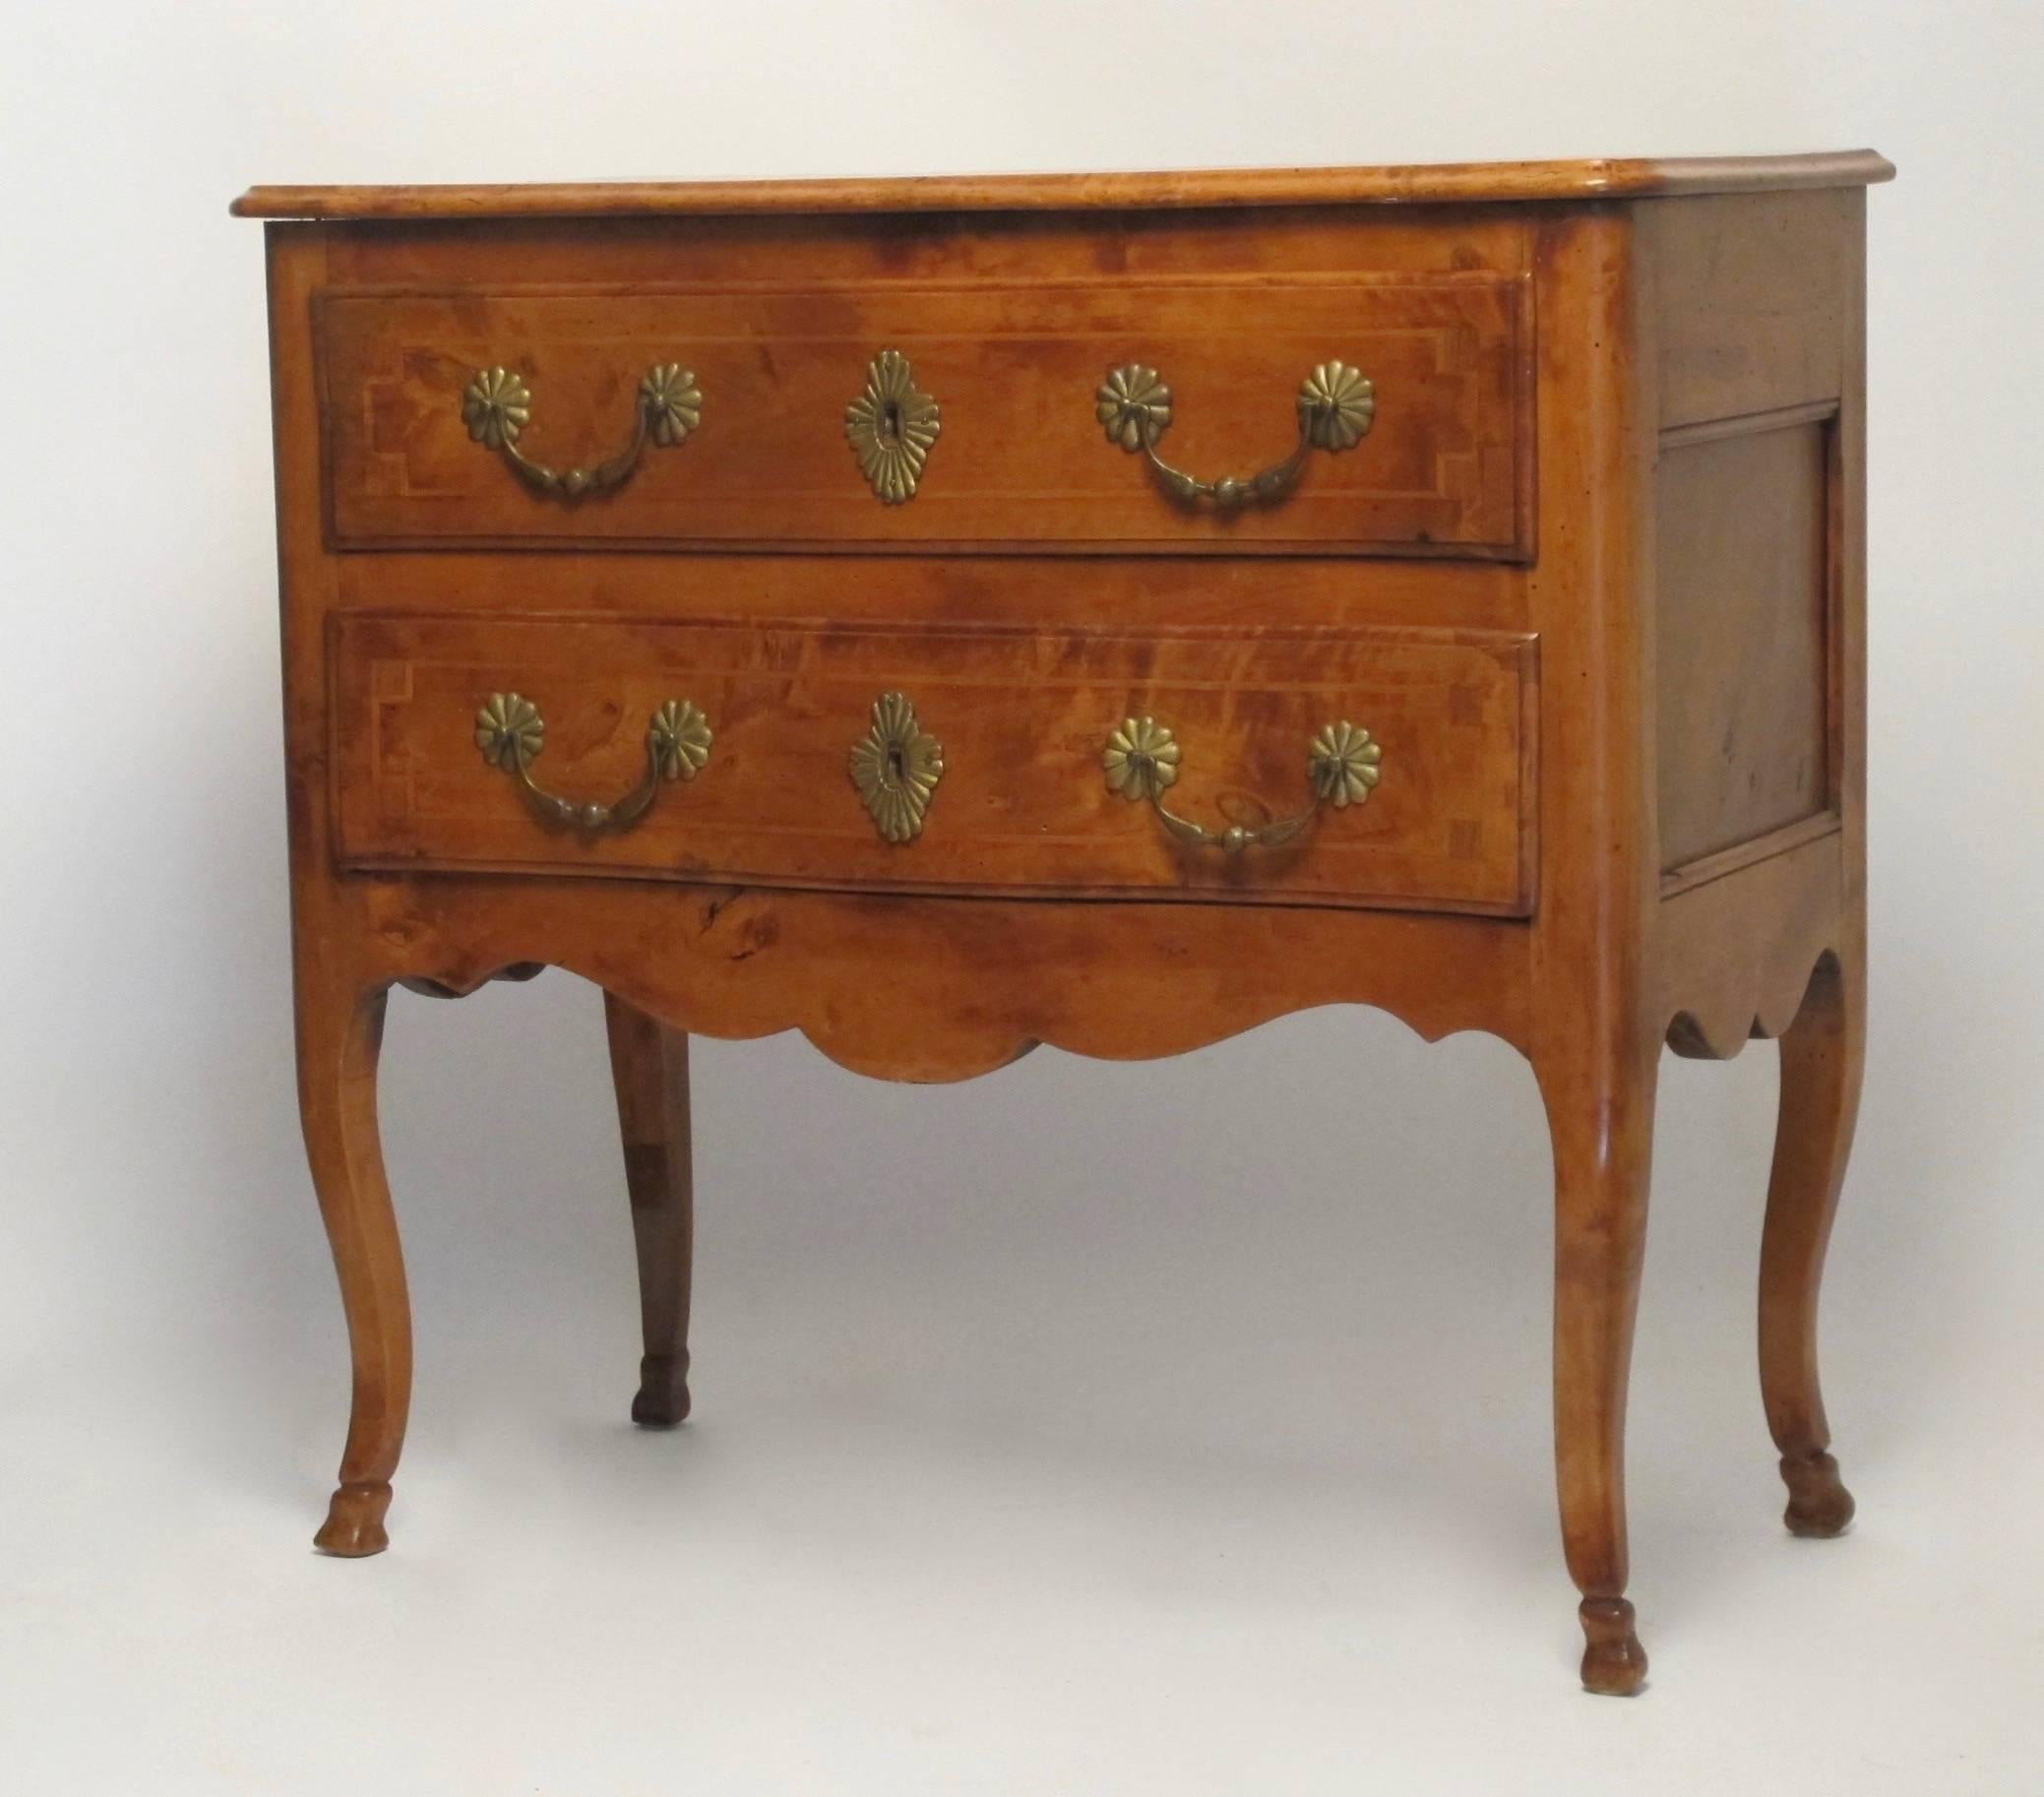 An unusual petite size applewood chest of drawers with shaped top above two satinwood inlaid drawers. Having brass hardware, oval sunburst escutcheons, and supported on cabriole legs ending in carved feet, France, circa 1820.